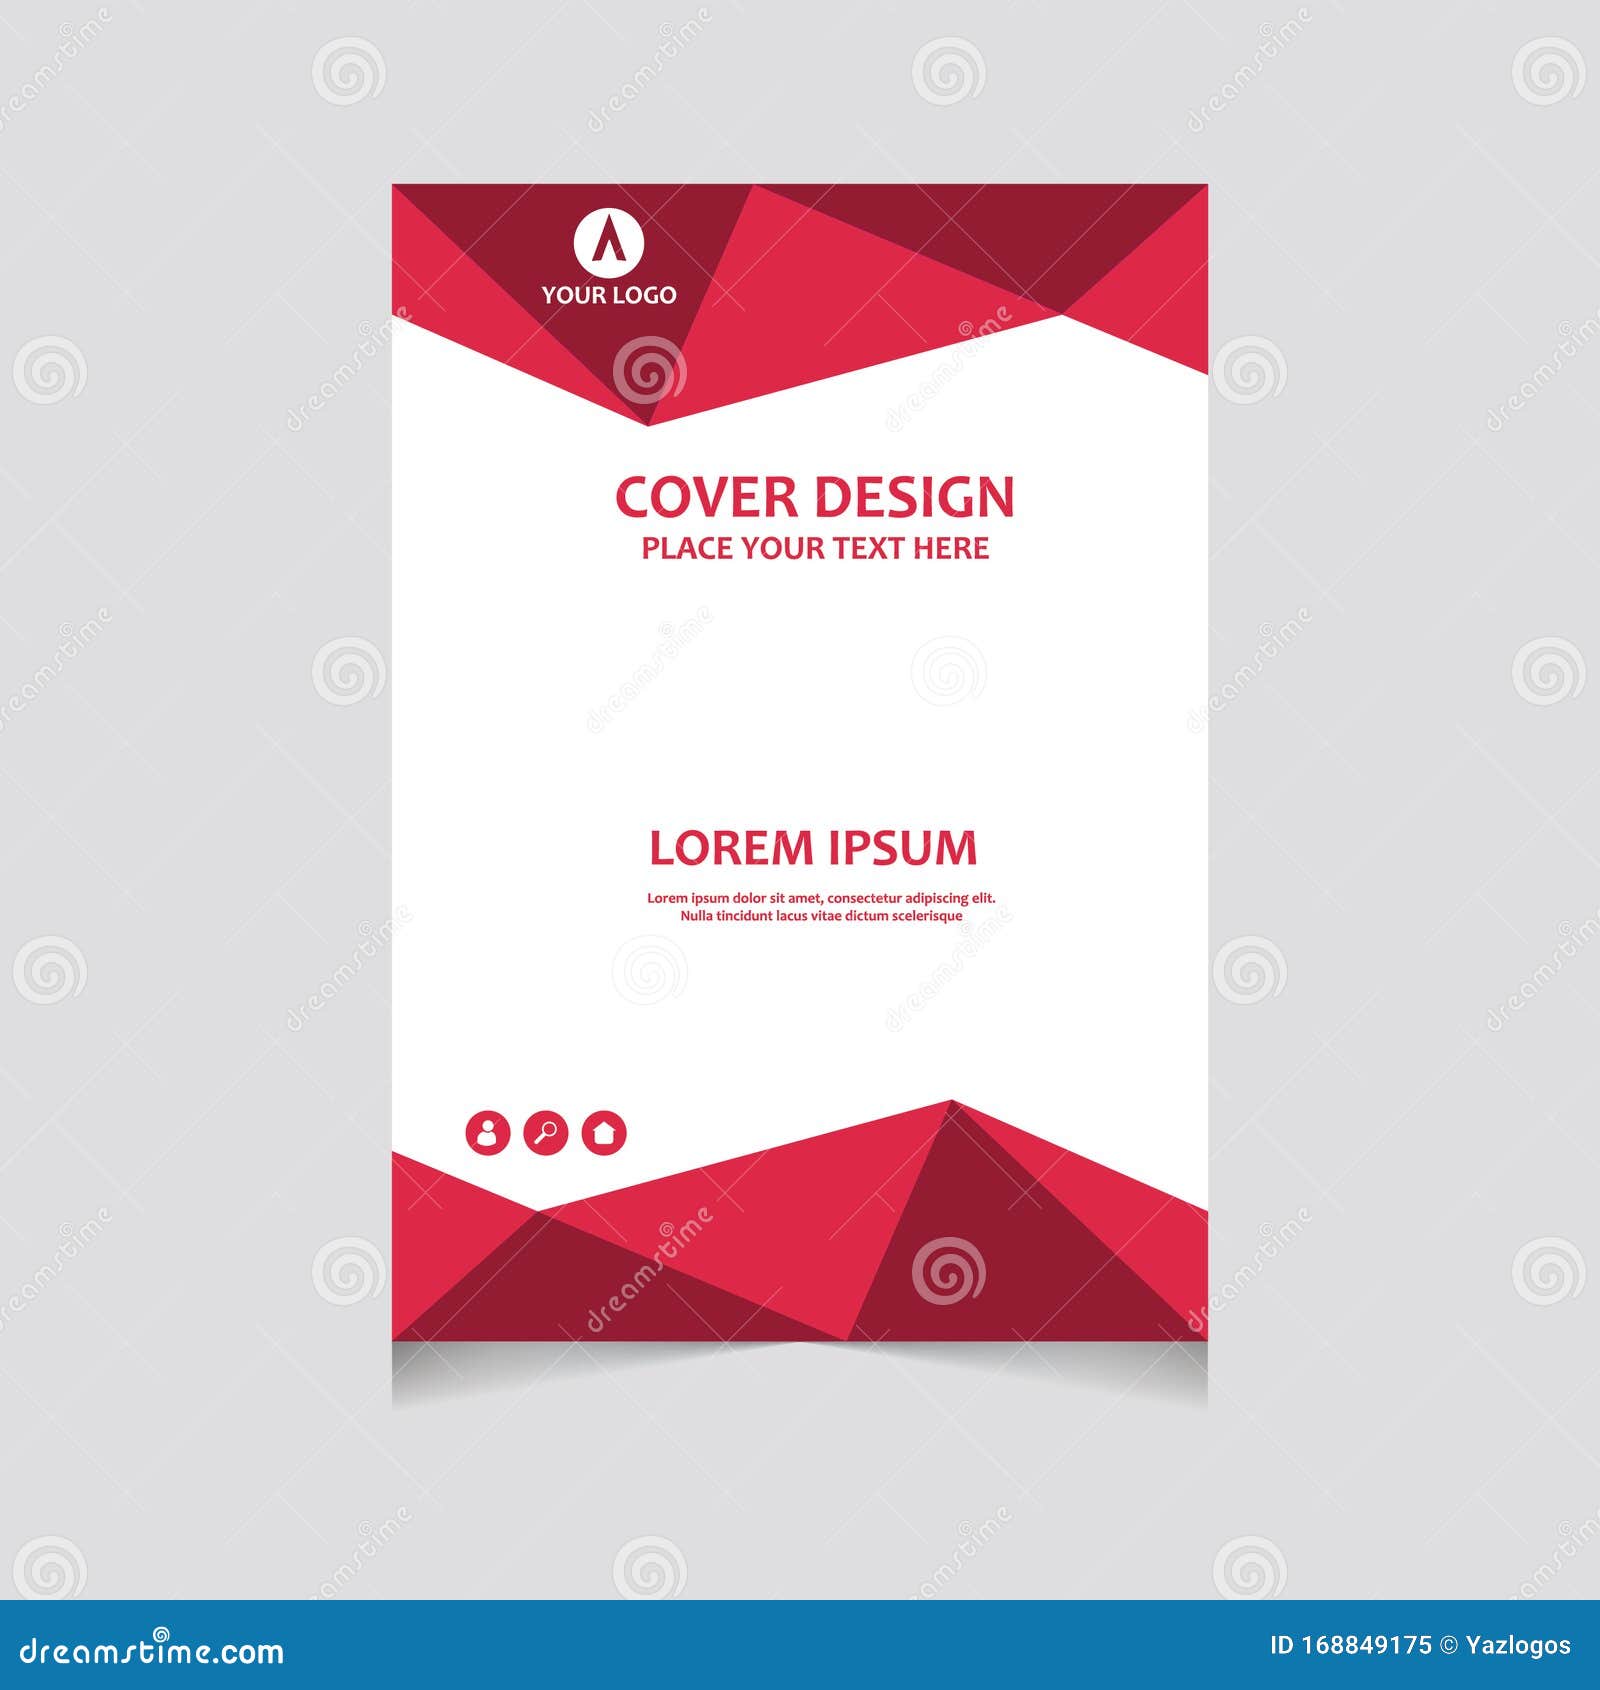 Cover Page Design Template from thumbs.dreamstime.com